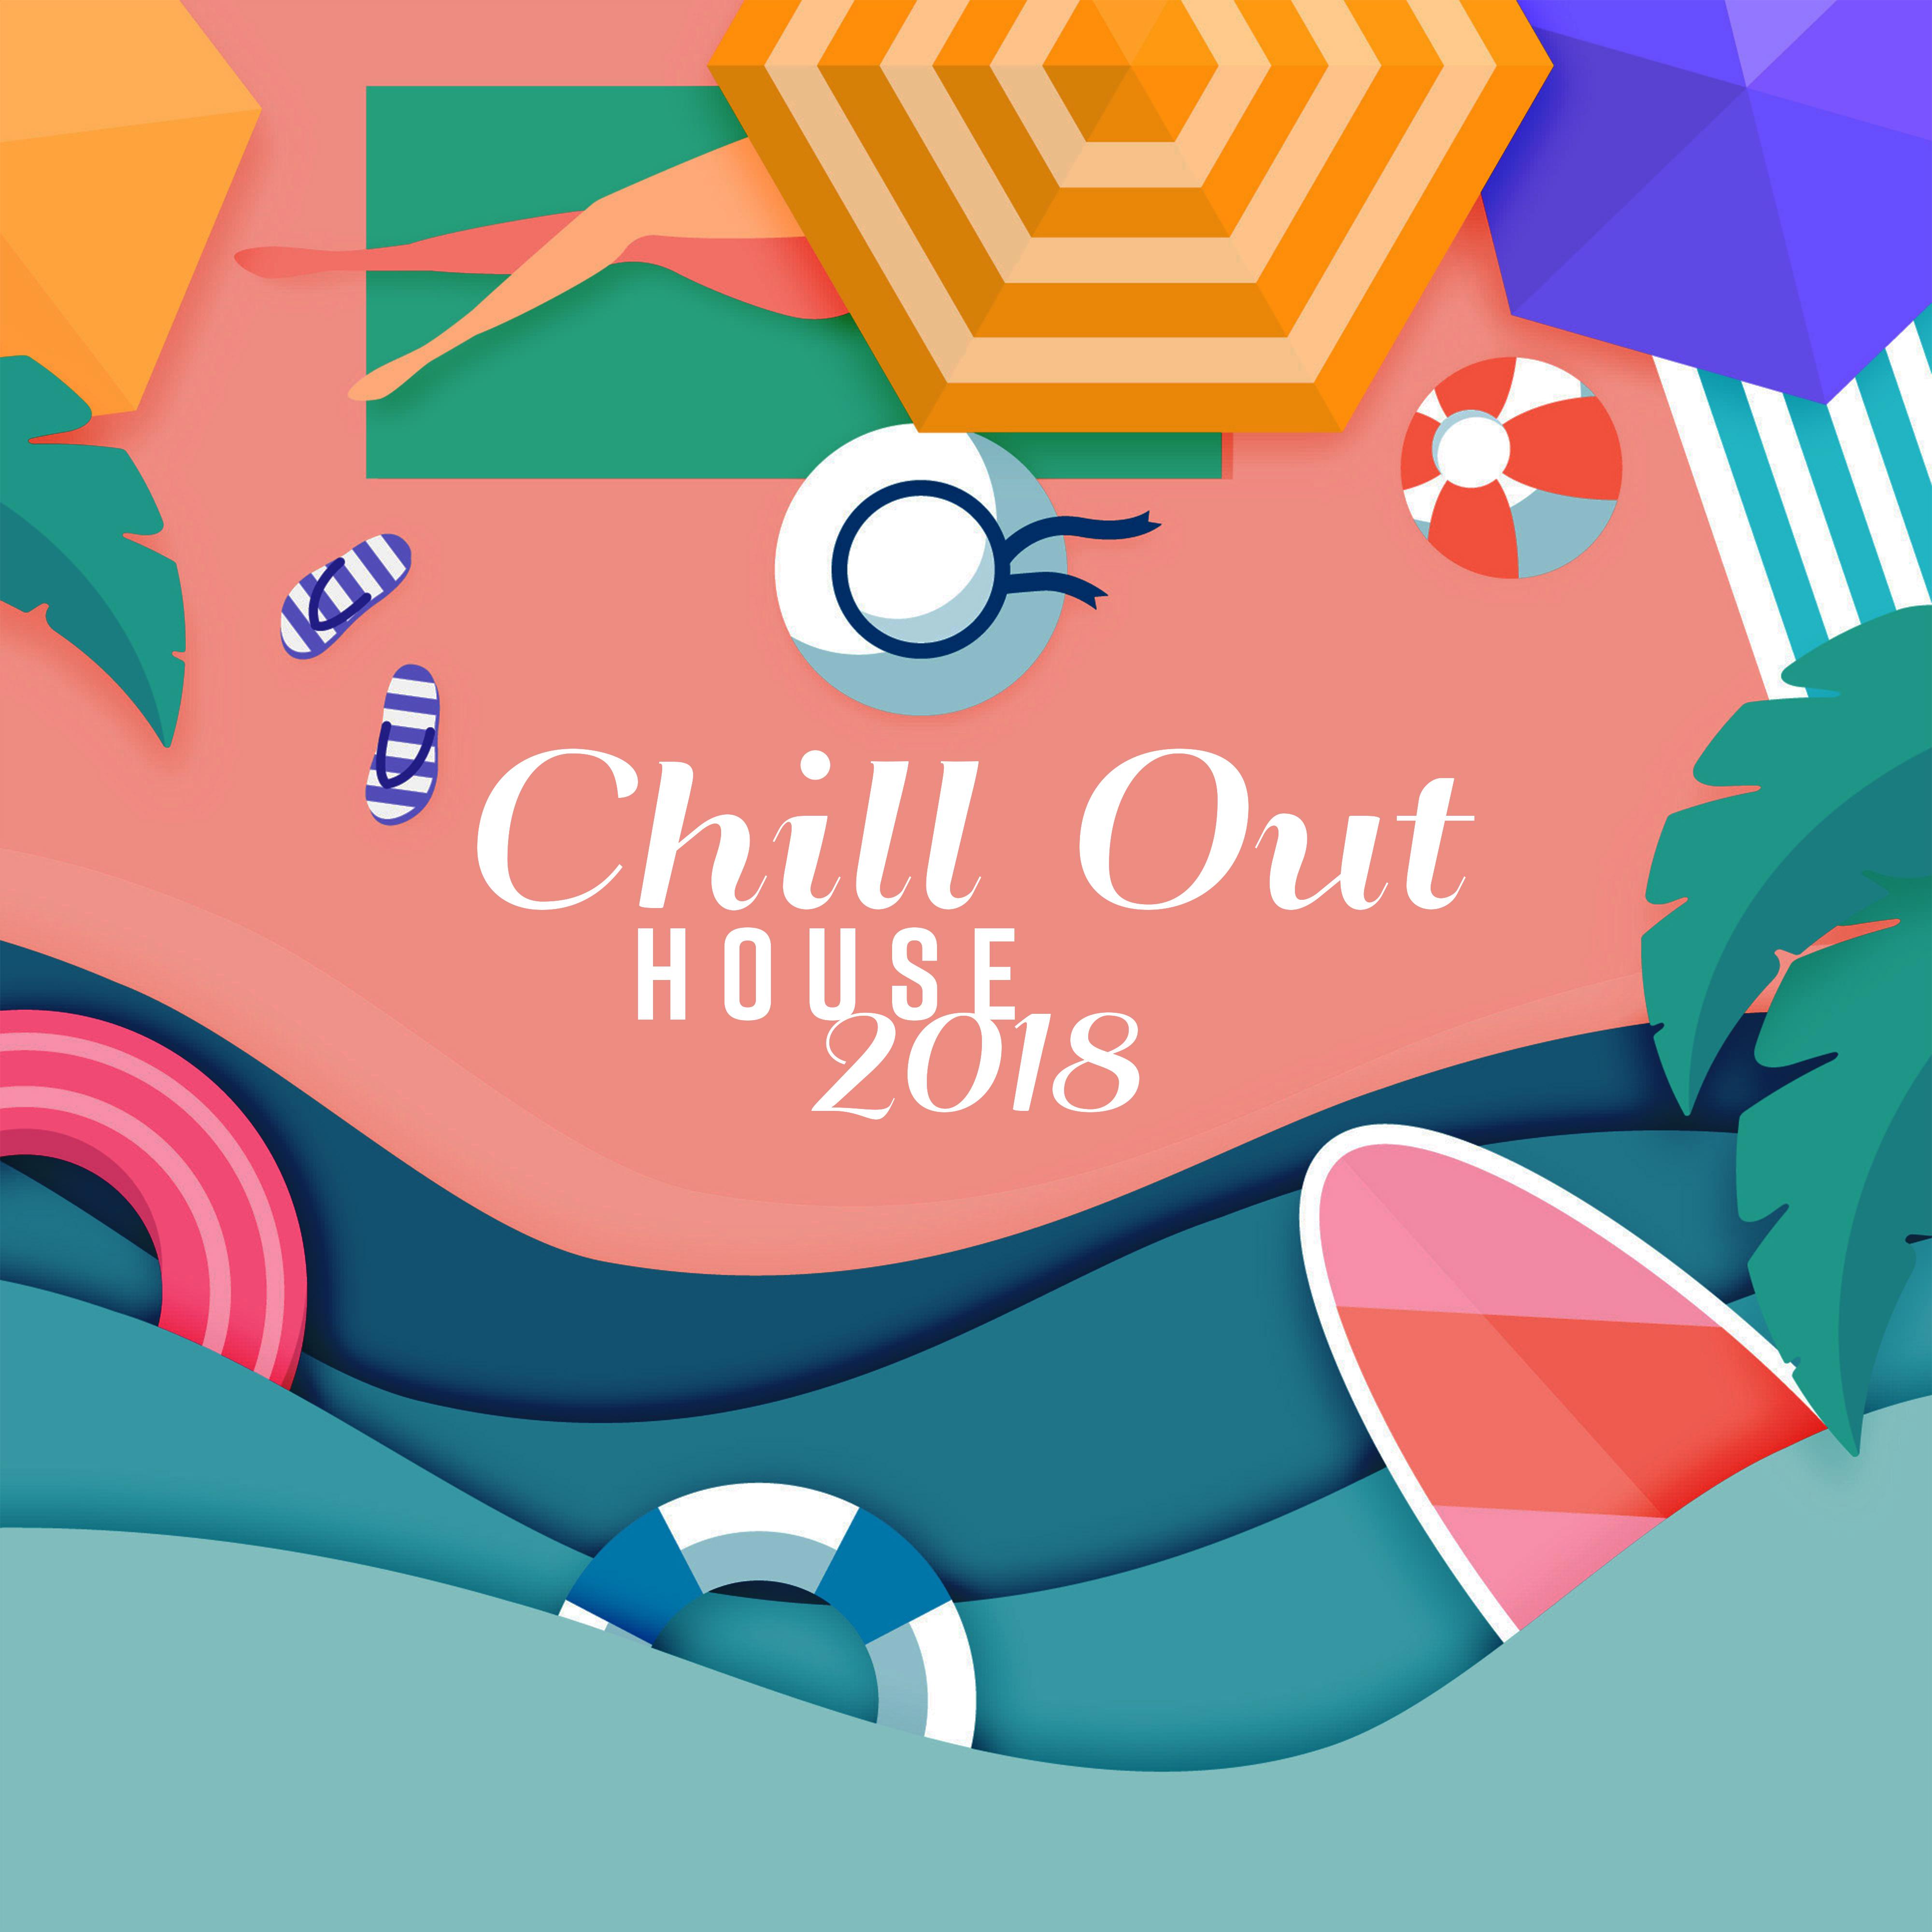 Chill Out House 2018